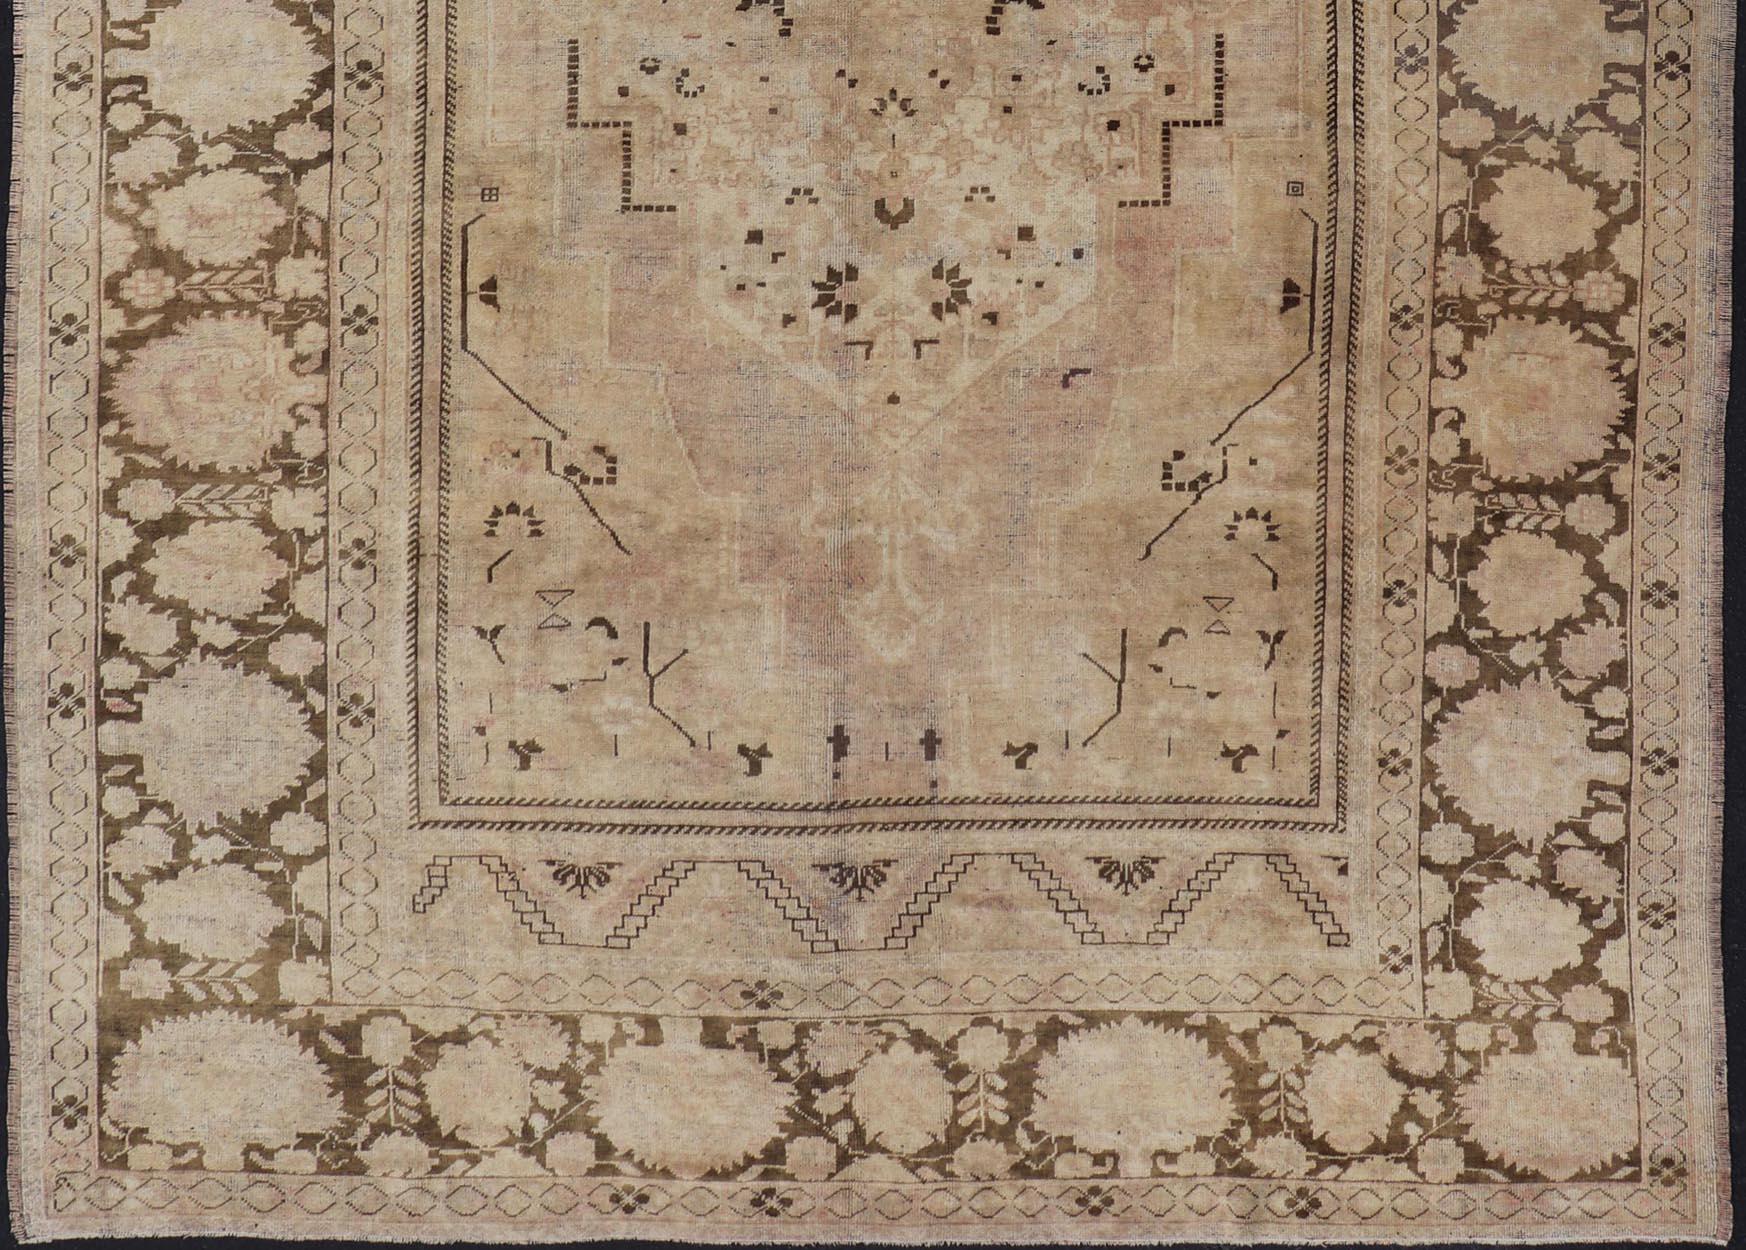 Vintage Oushak rug with muted neutral colors in tan, taupe, beige, gray & brown rug/EN-92318, vintage Oushak, vintage Turkish rug

This unique neutral color vintage Oushak Turkish rug features a delicate floral border framed by subdued geometric